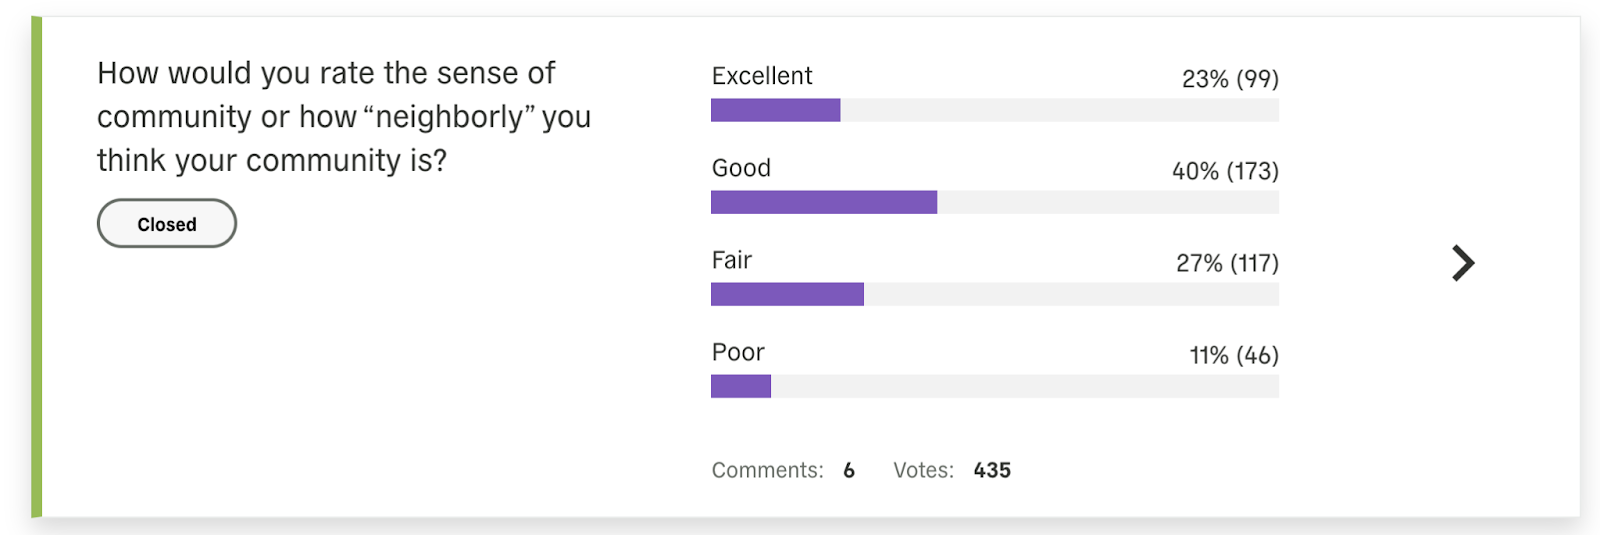 screen shot of poll responses on how neighborly people rate their community